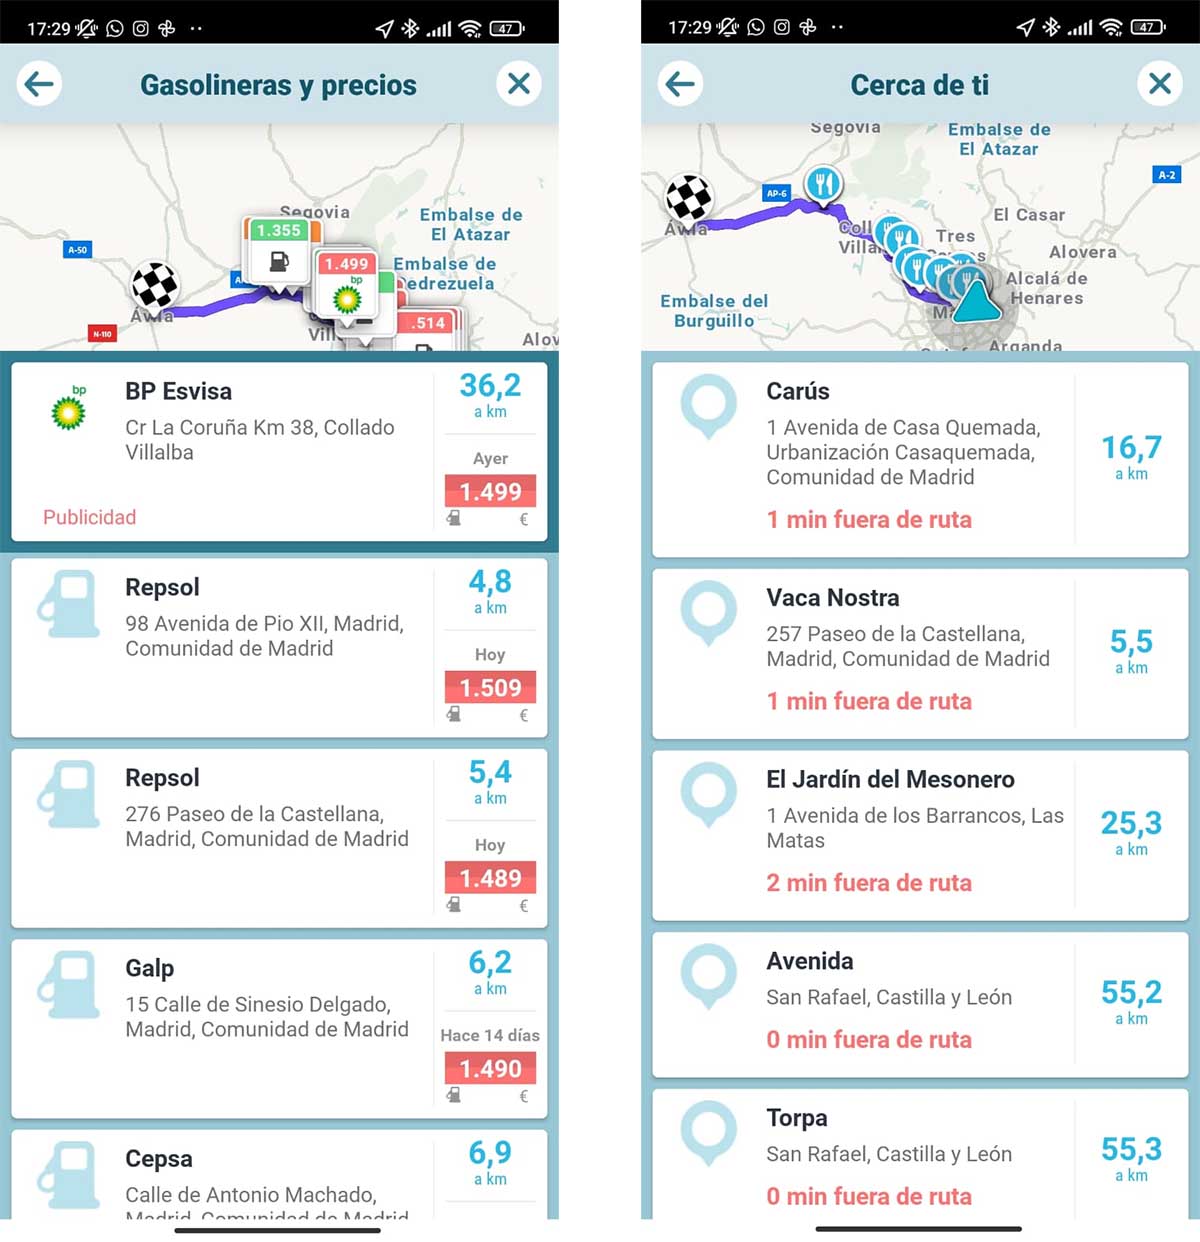 gas stations and restaurants in Waze